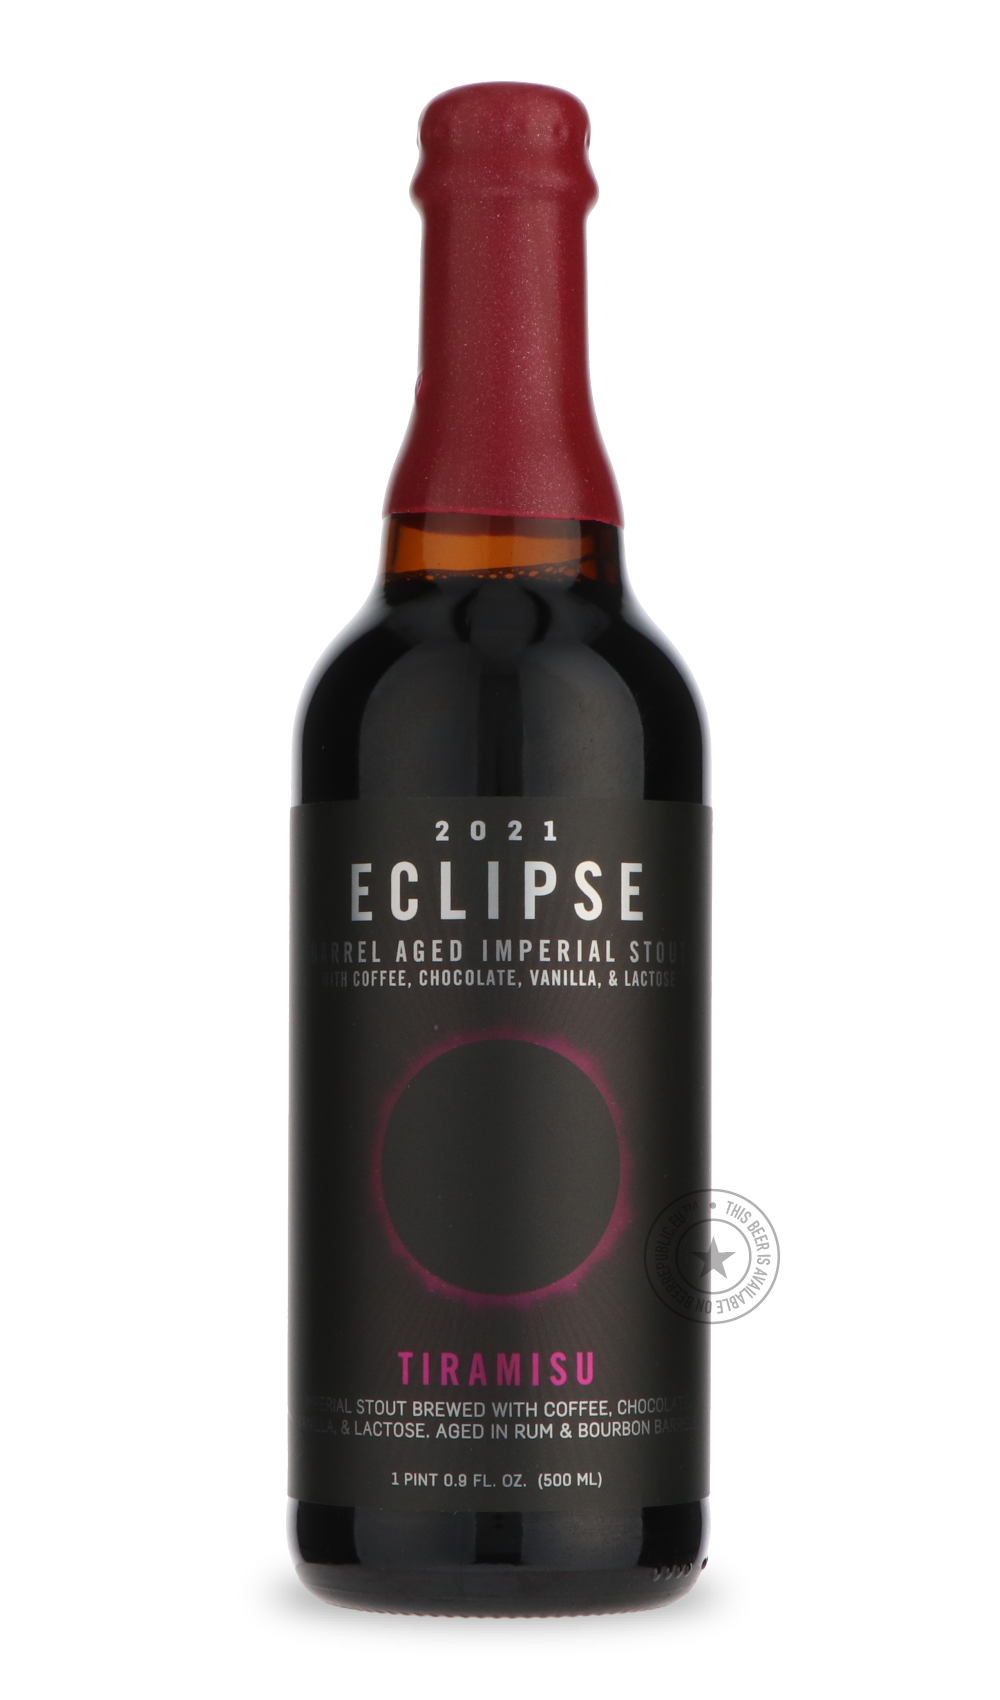 -FiftyFifty- Eclipse Tiramisu-Stout & Porter- Only @ Beer Republic - The best online beer store for American & Canadian craft beer - Buy beer online from the USA and Canada - Bier online kopen - Amerikaans bier kopen - Craft beer store - Craft beer kopen - Amerikanisch bier kaufen - Bier online kaufen - Acheter biere online - IPA - Stout - Porter - New England IPA - Hazy IPA - Imperial Stout - Barrel Aged - Barrel Aged Imperial Stout - Brown - Dark beer - Blond - Blonde - Pilsner - Lager - Wheat - Weizen - 